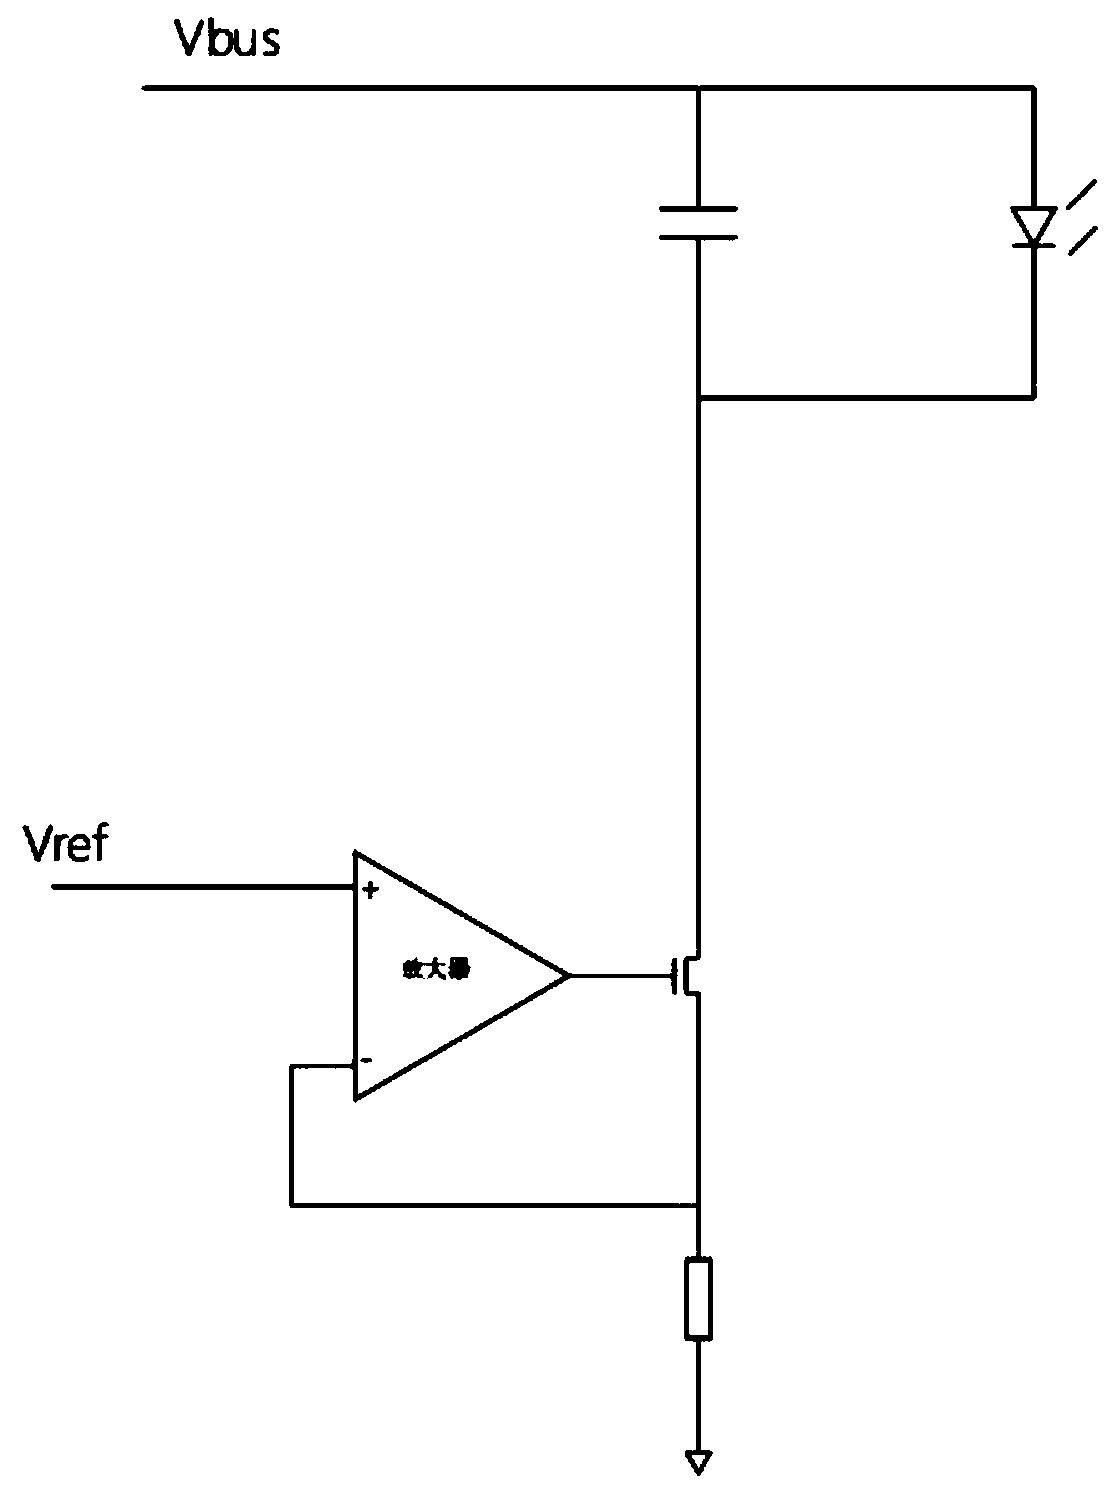 LED (Light Emitting Diode) driving circuit based on power tube safety protection